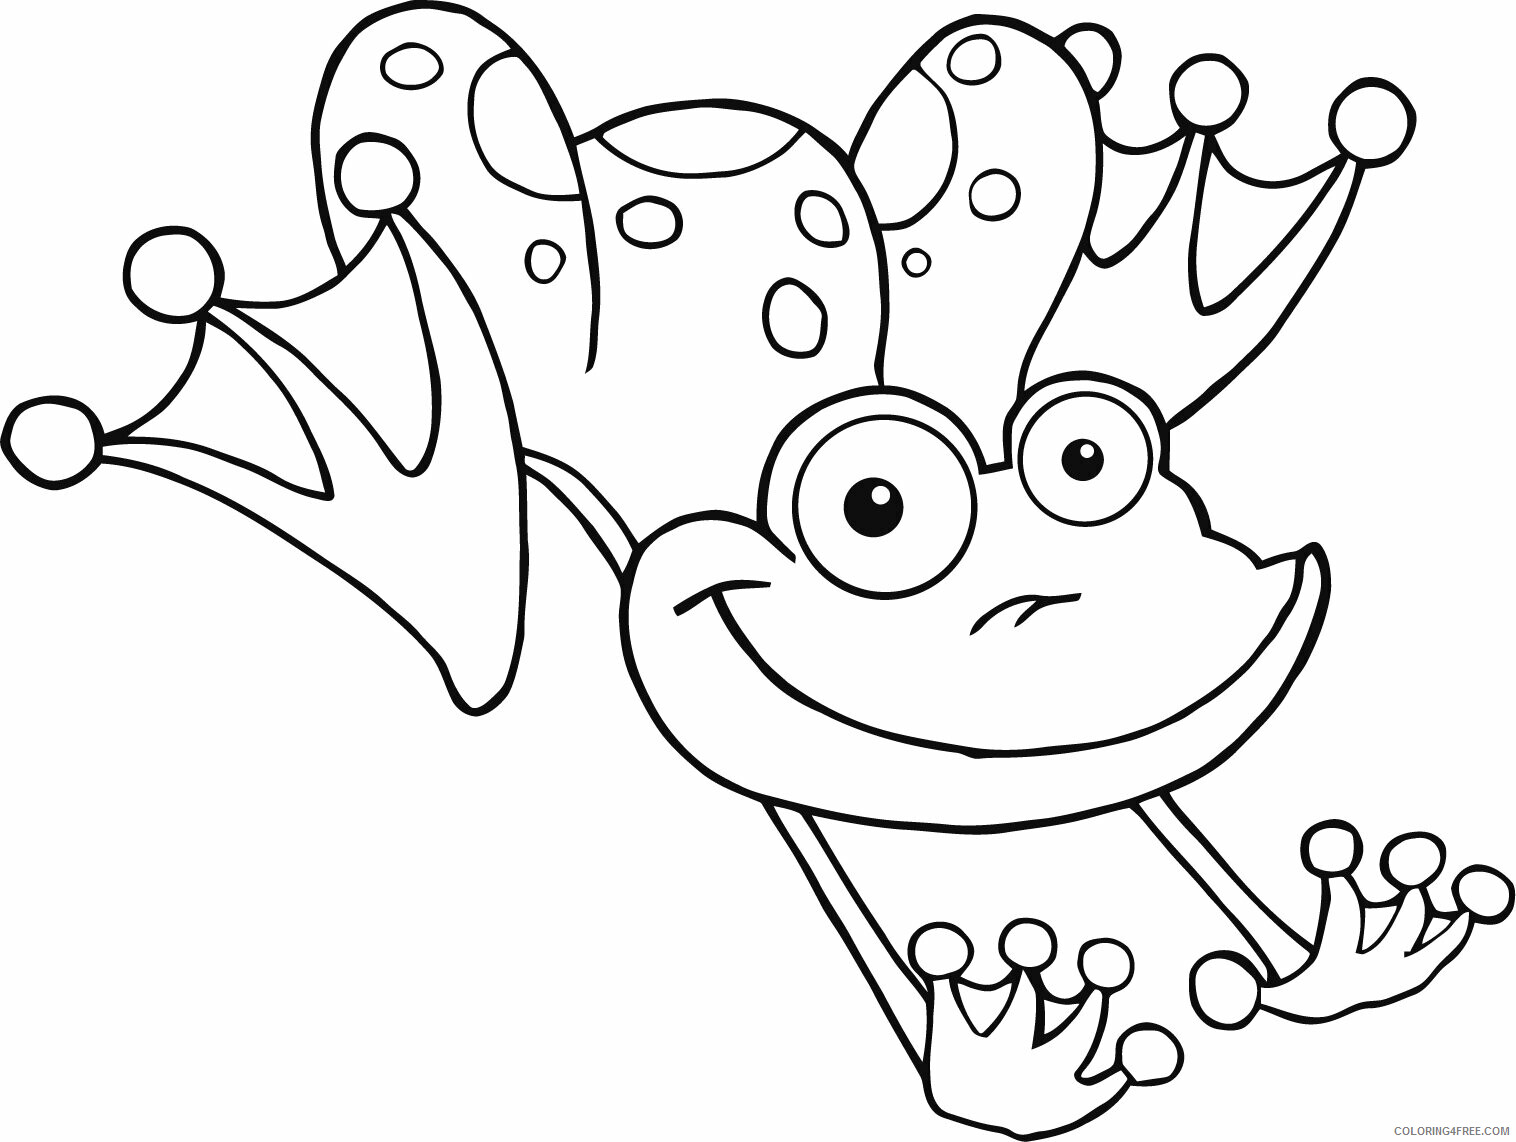 Frog Coloring Pages Animal Printable Sheets of Frogs For Kids 2021 2271 Coloring4free